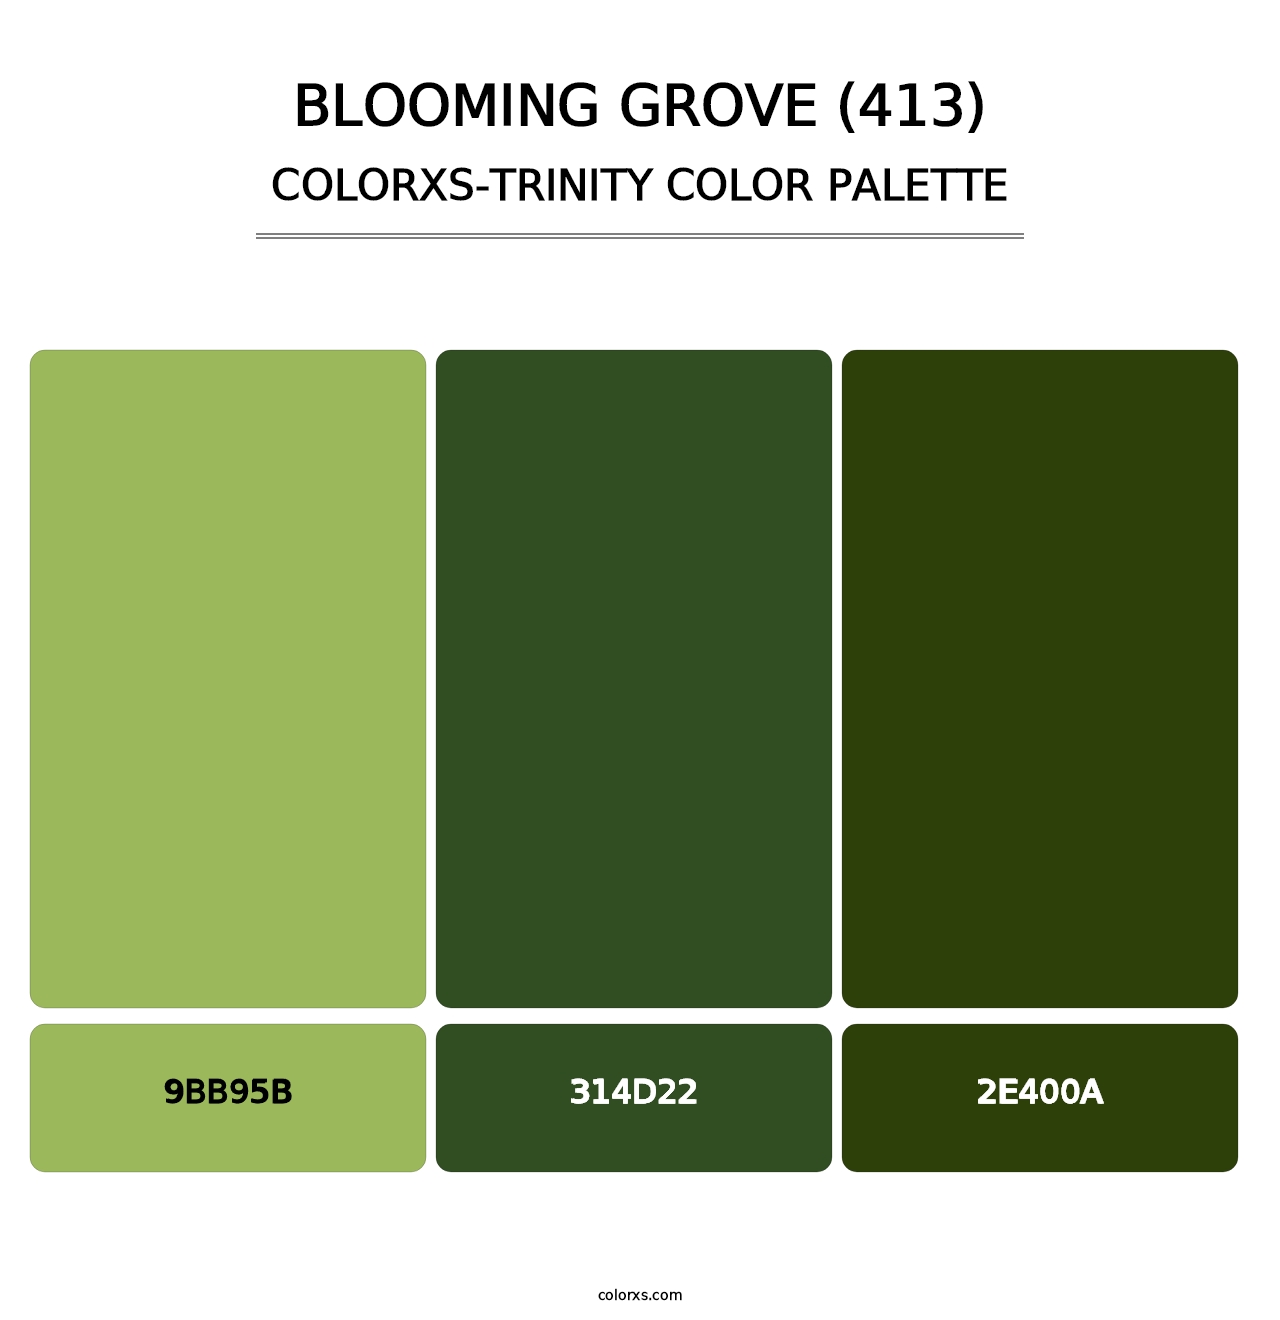 Blooming Grove (413) - Colorxs Trinity Palette